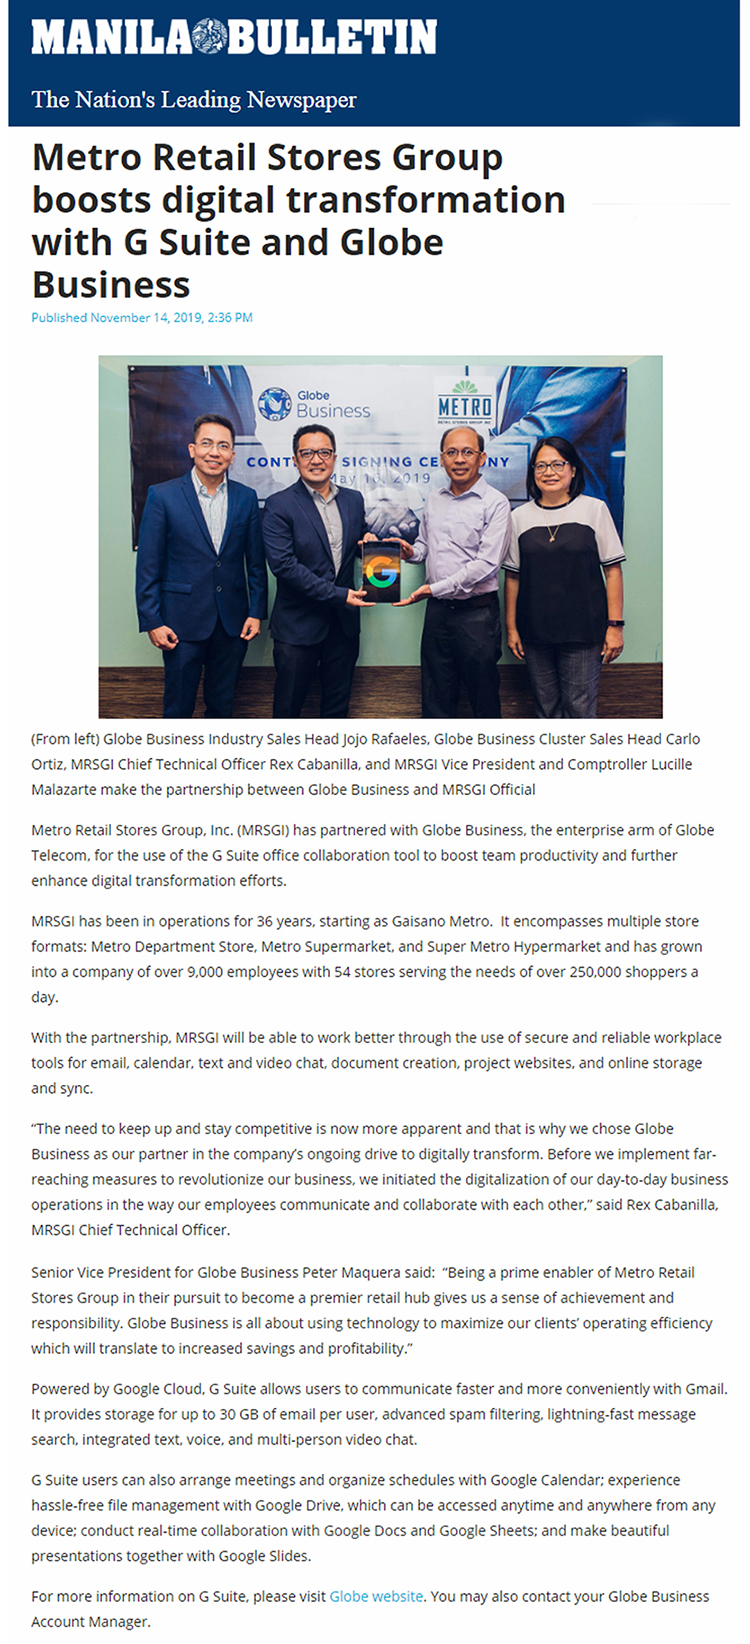 November 14 2019 Metro Retail Stores Group boosts digital transformation with G Suite and Globe Manila Bulletinwww.mb.com.ph